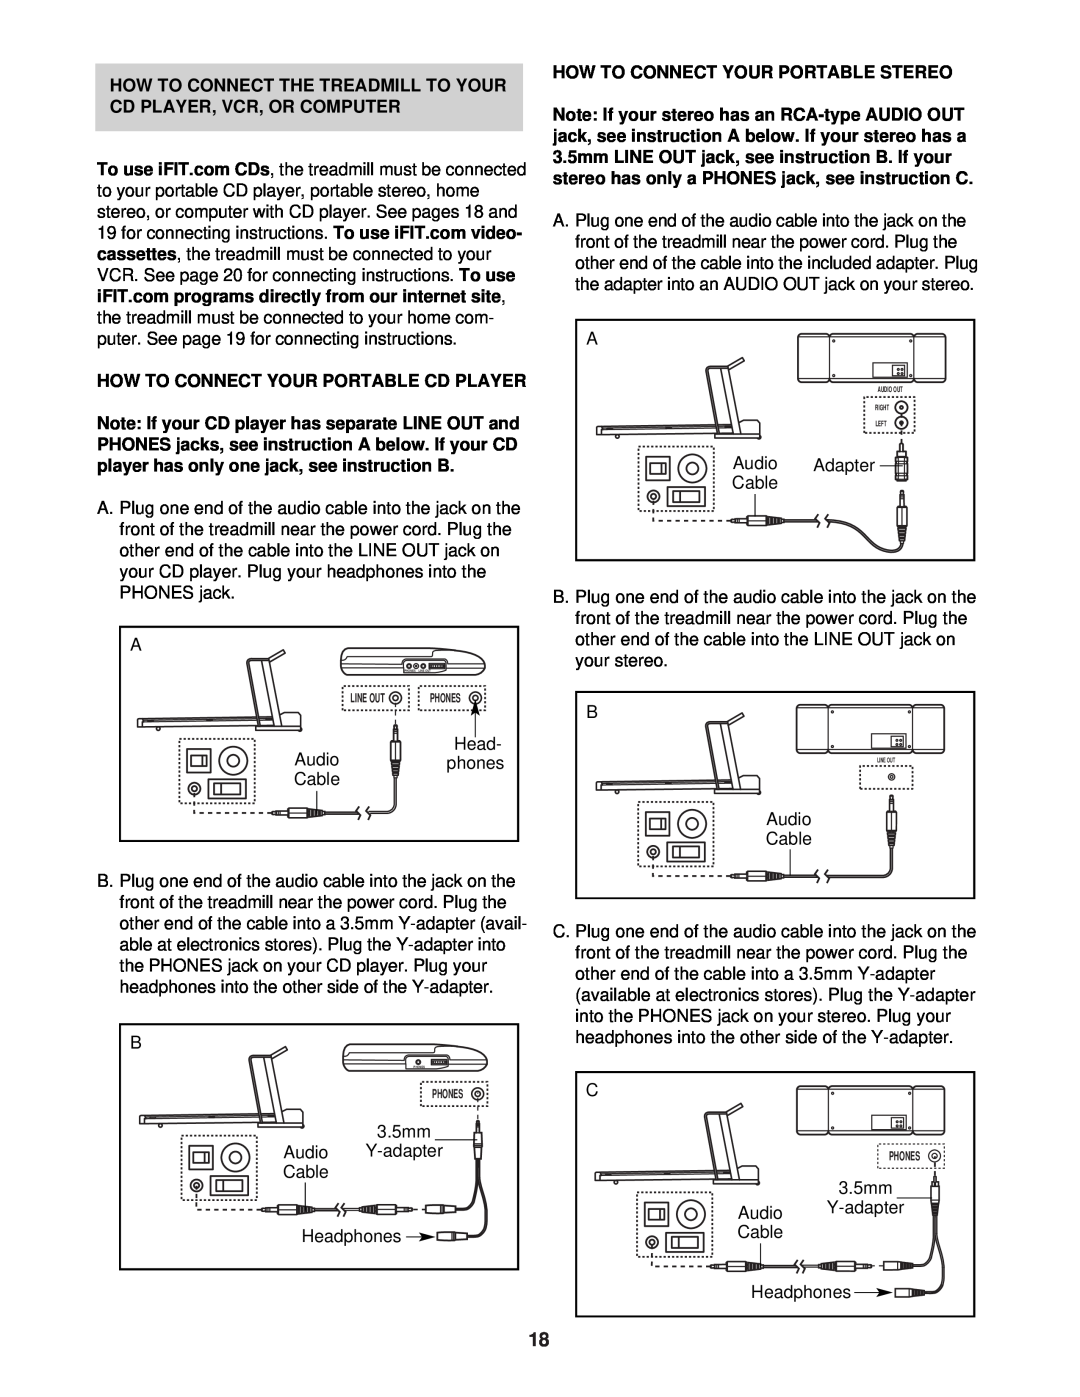 ProForm DTL62940 How To Connect The Treadmill To Your Cd Player, Vcr, Or Computer, How To Connect Your Portable Cd Player 